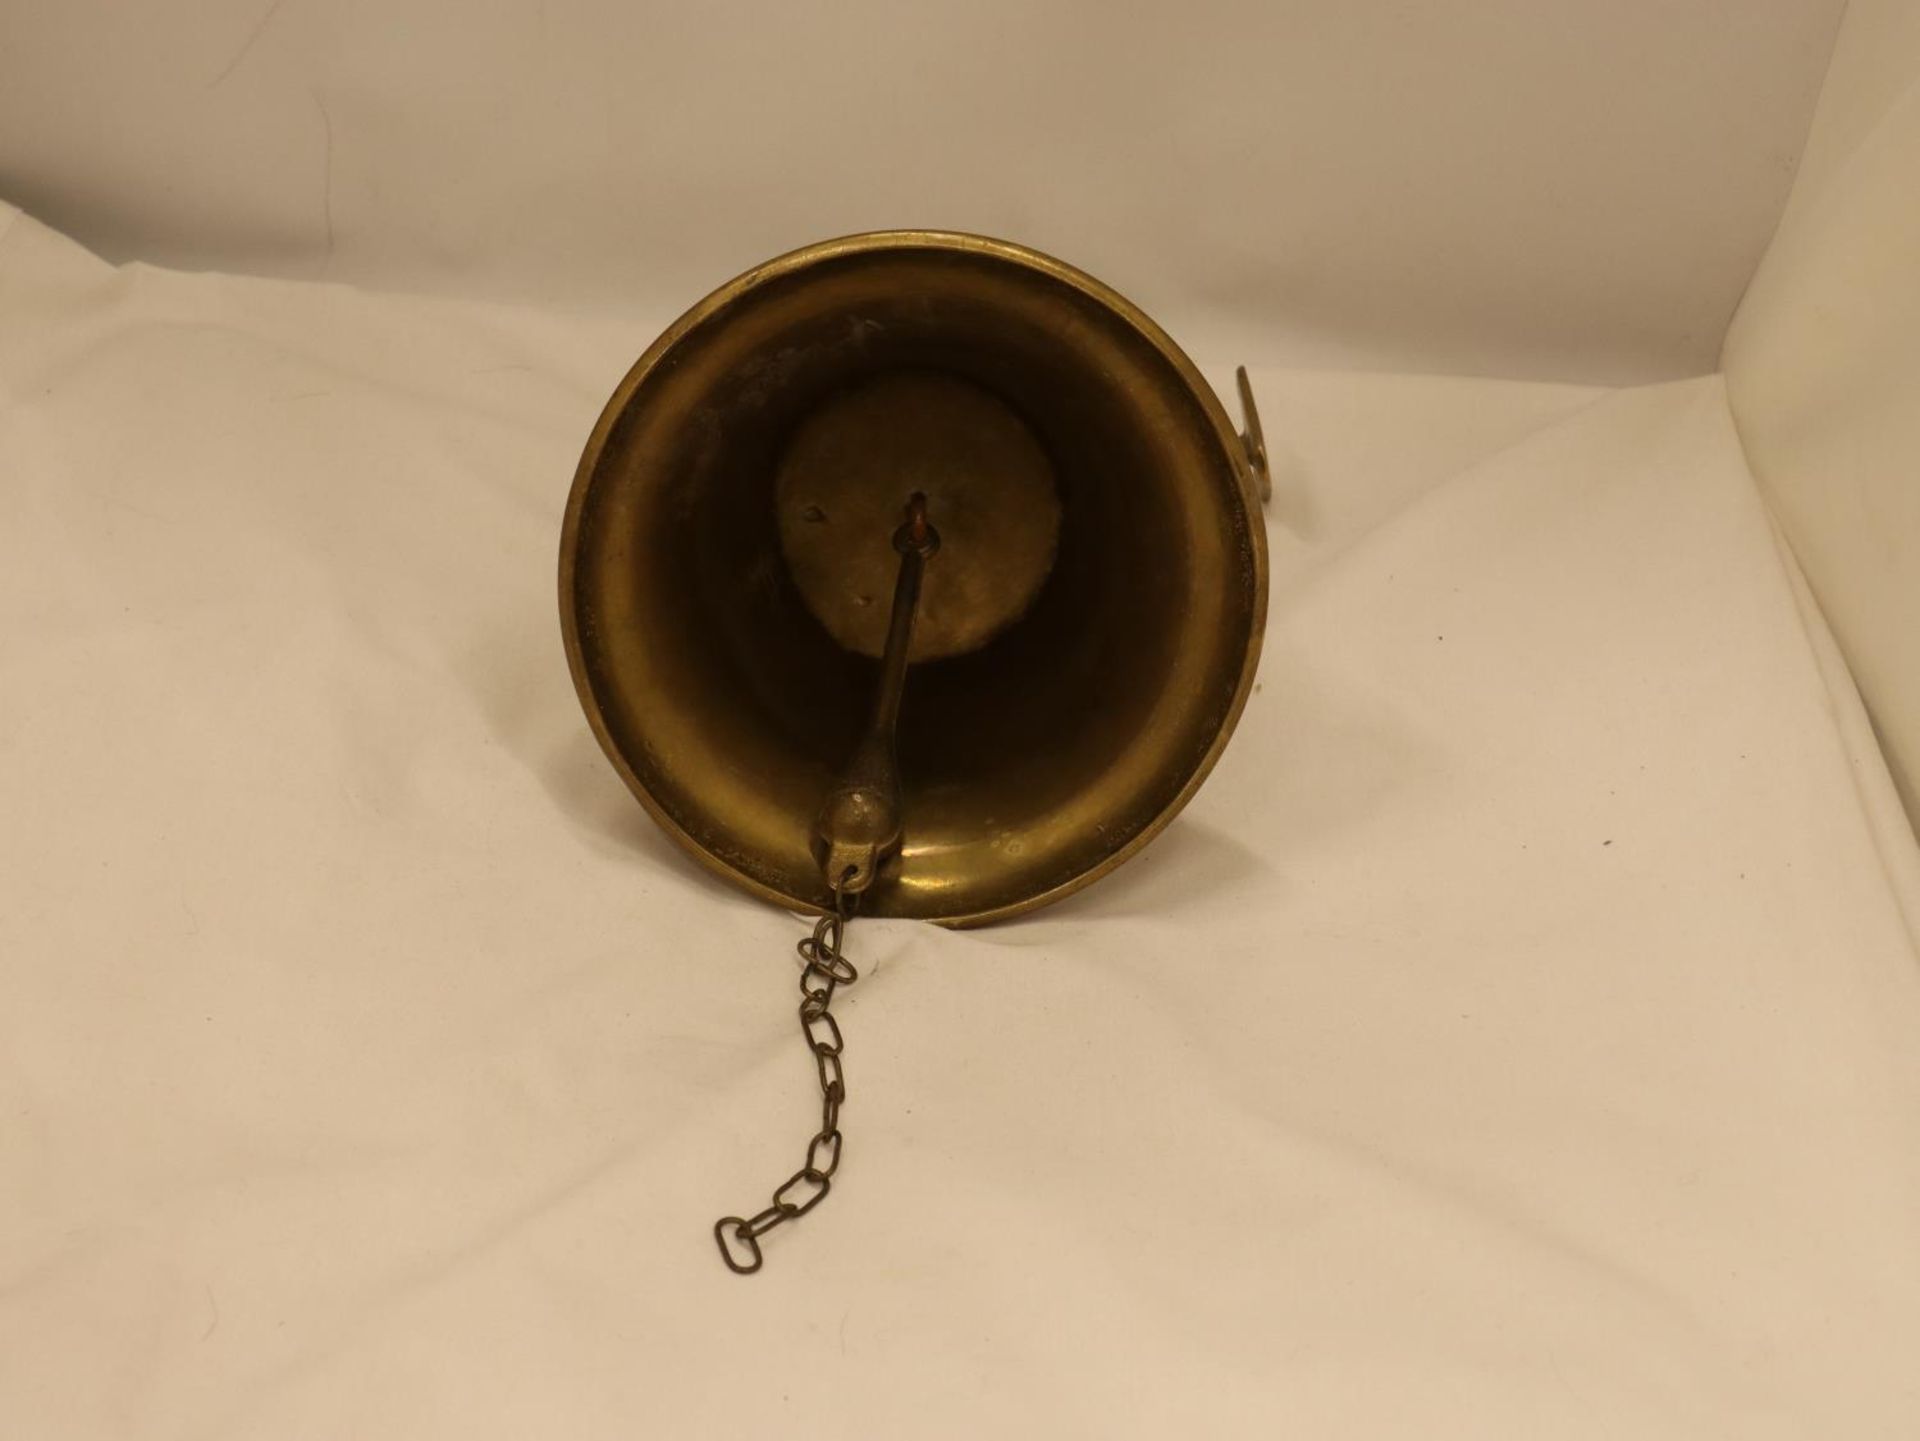 A LARGE HEAVY BRASS WALL BELL, HEIGHT 20CM - Image 3 of 4